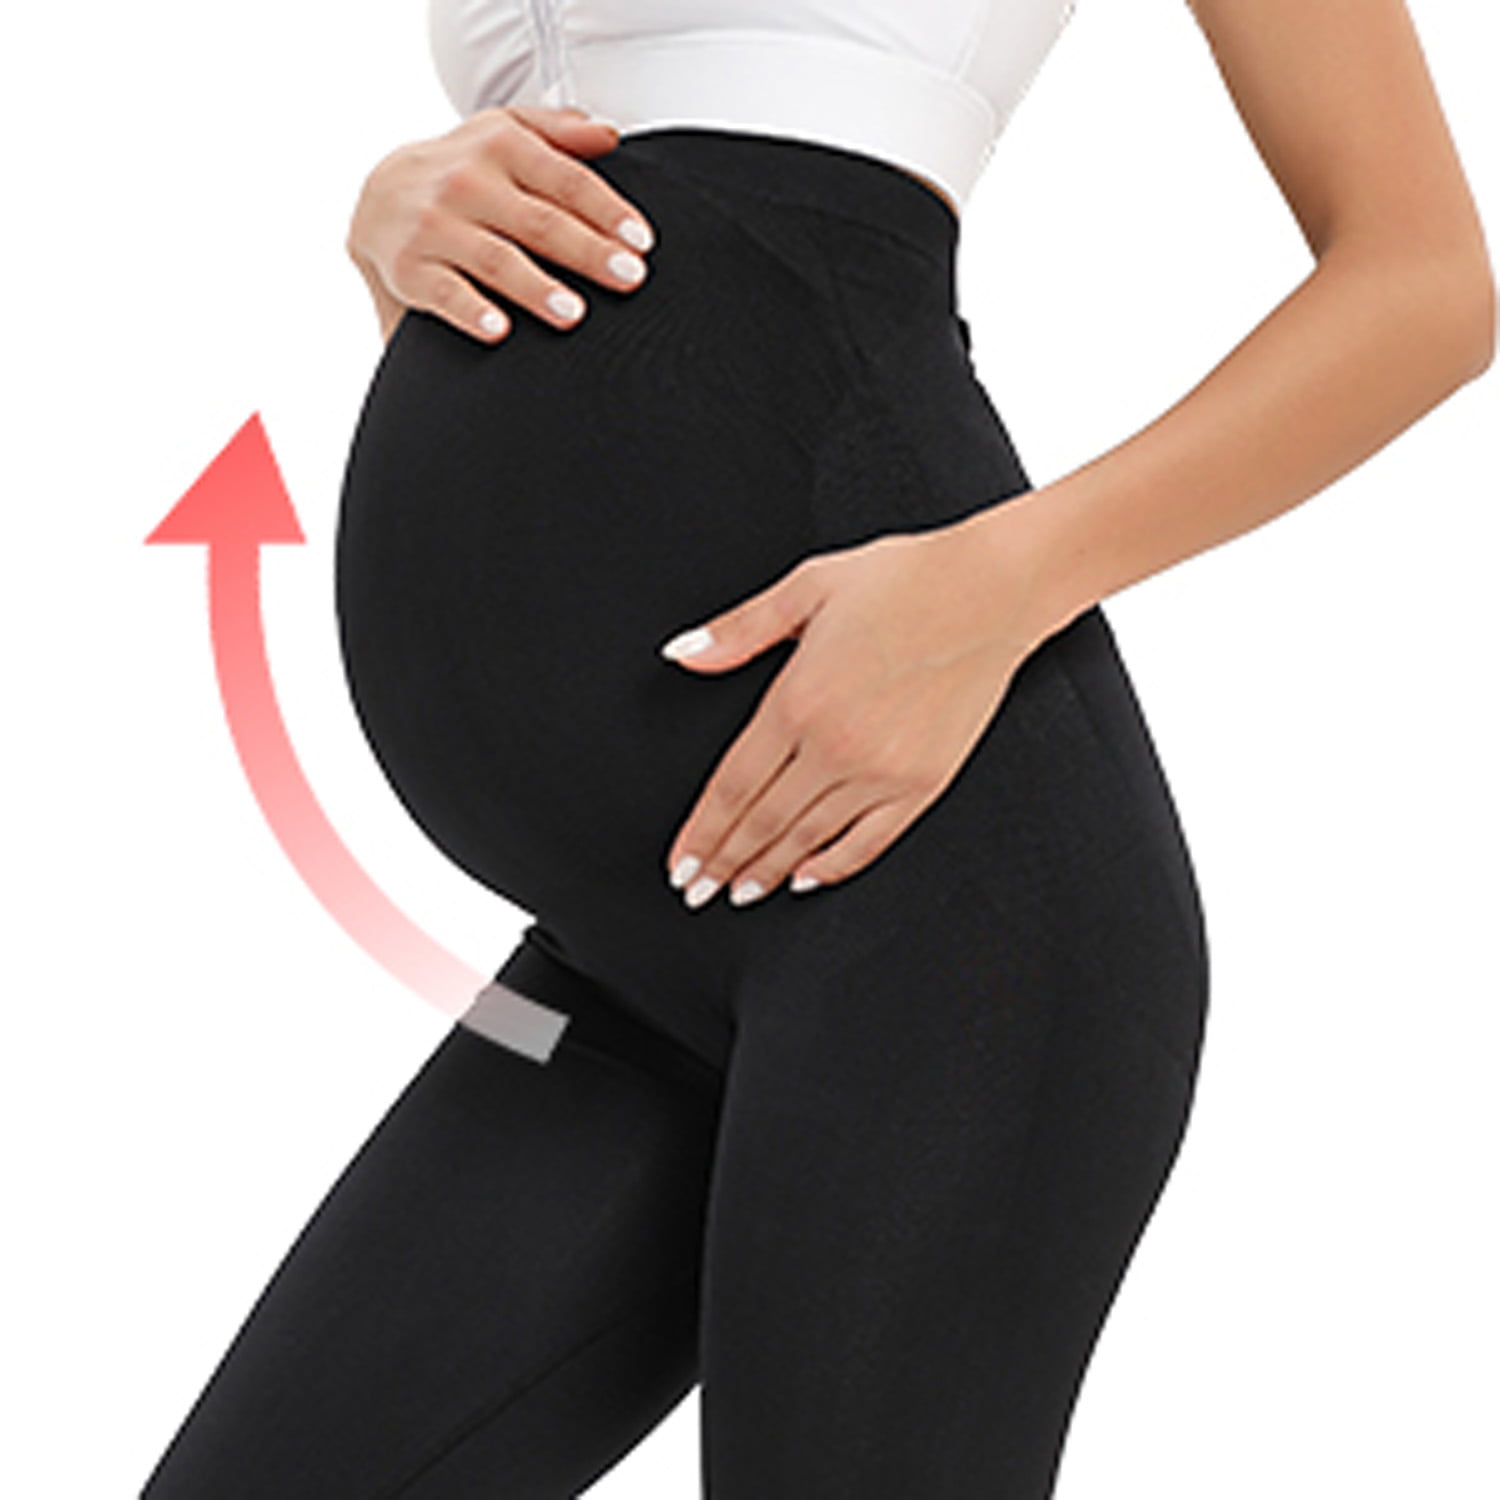 MANZI 2 Pack Women Fleece Lined Maternity Leggings with Full Panel Tights, Winter  Warm Over The Belly Pregnancy Active Wear Athletic Yoga Pants 